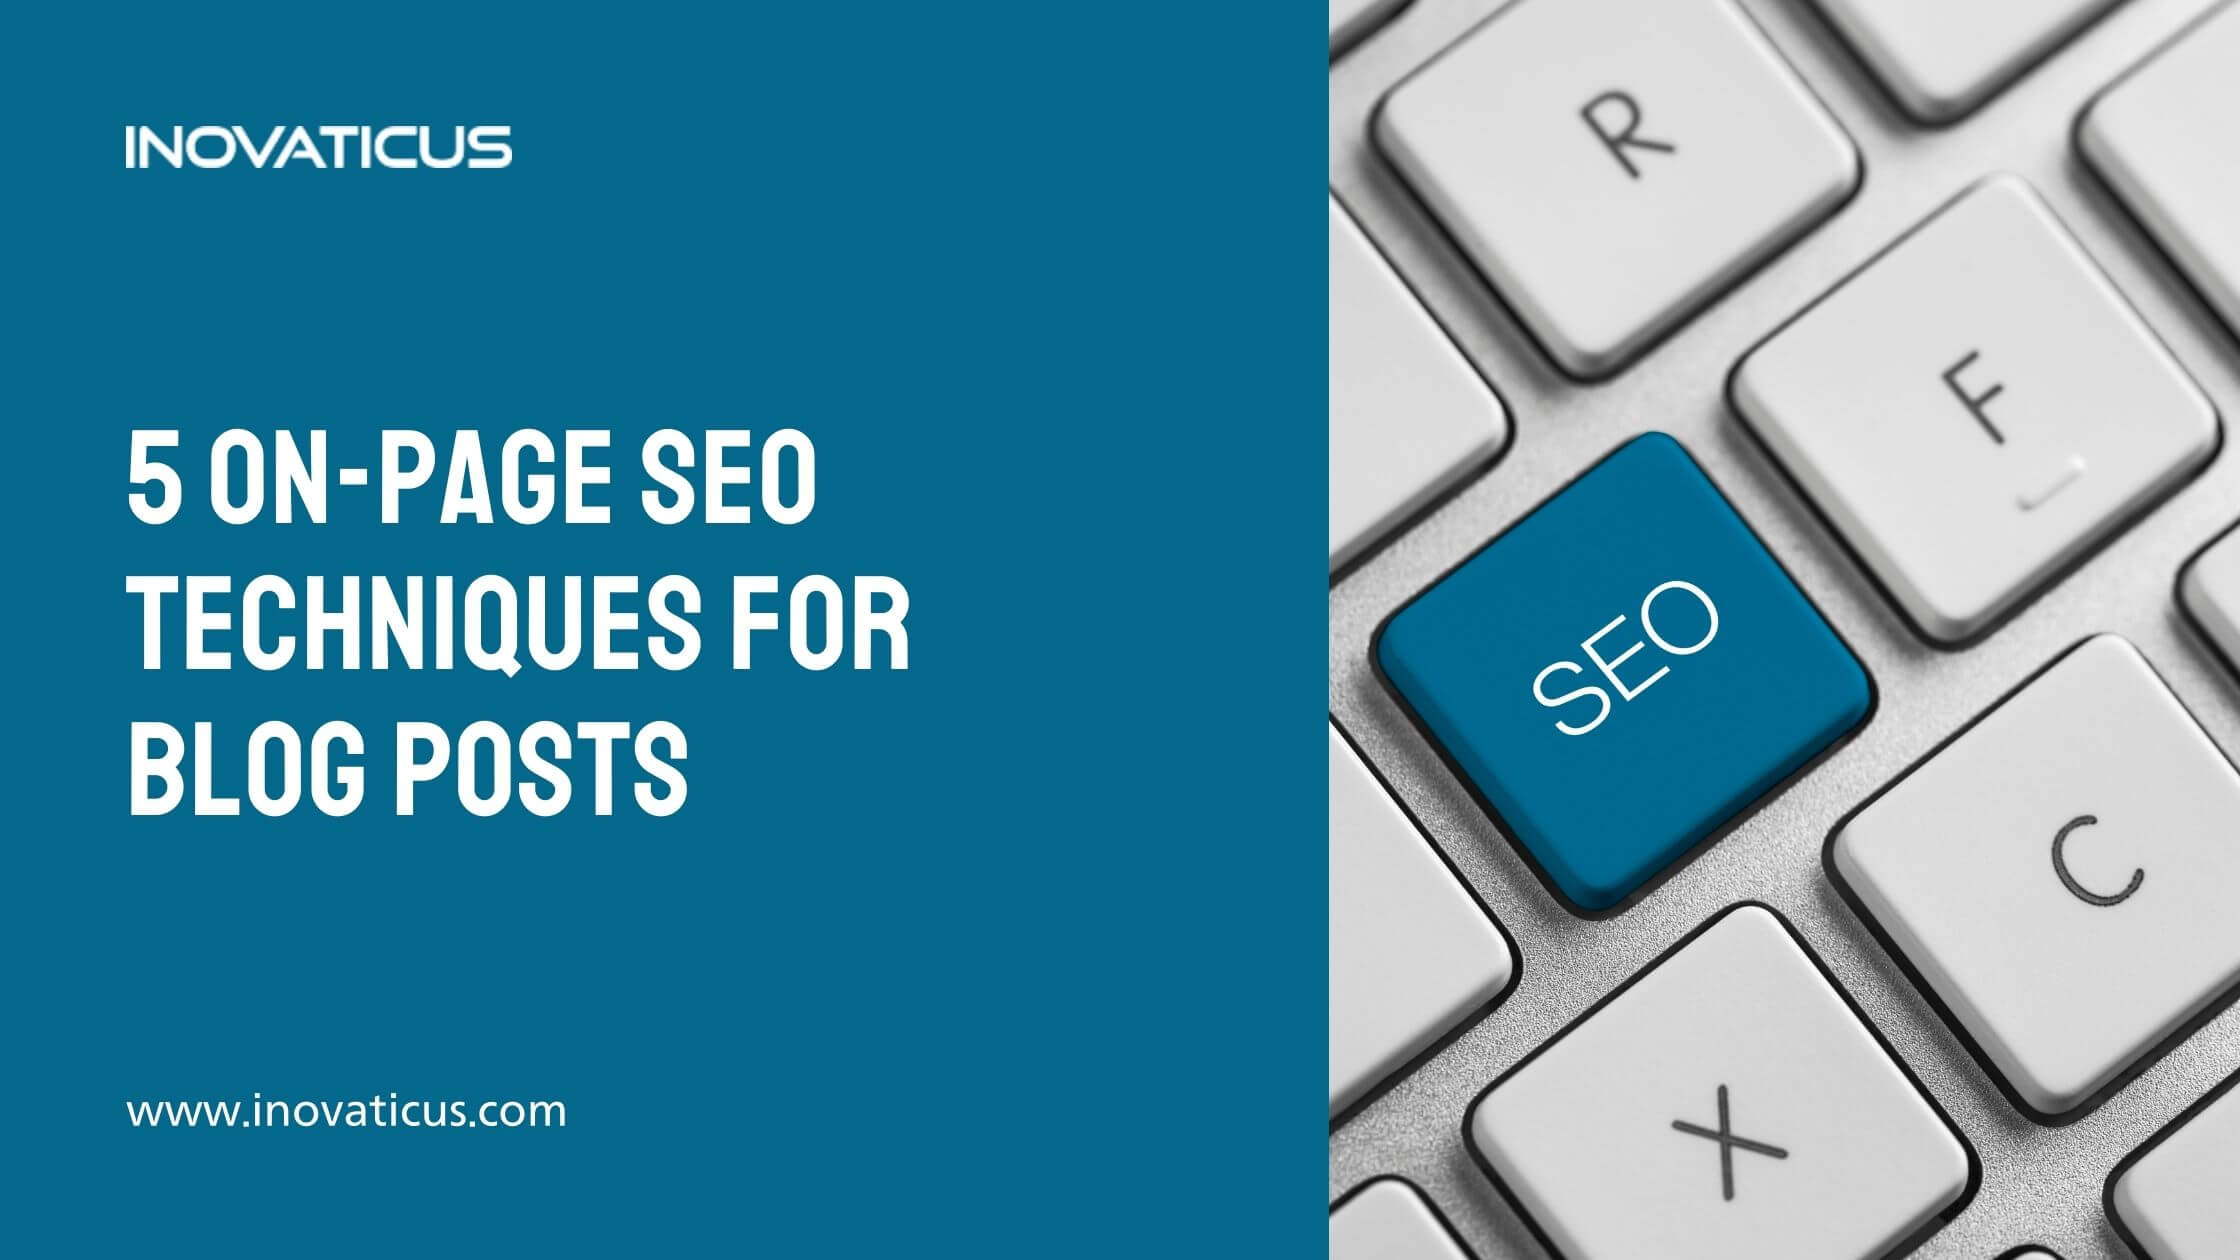 5 On-Page SEO Techniques For Blog Posts